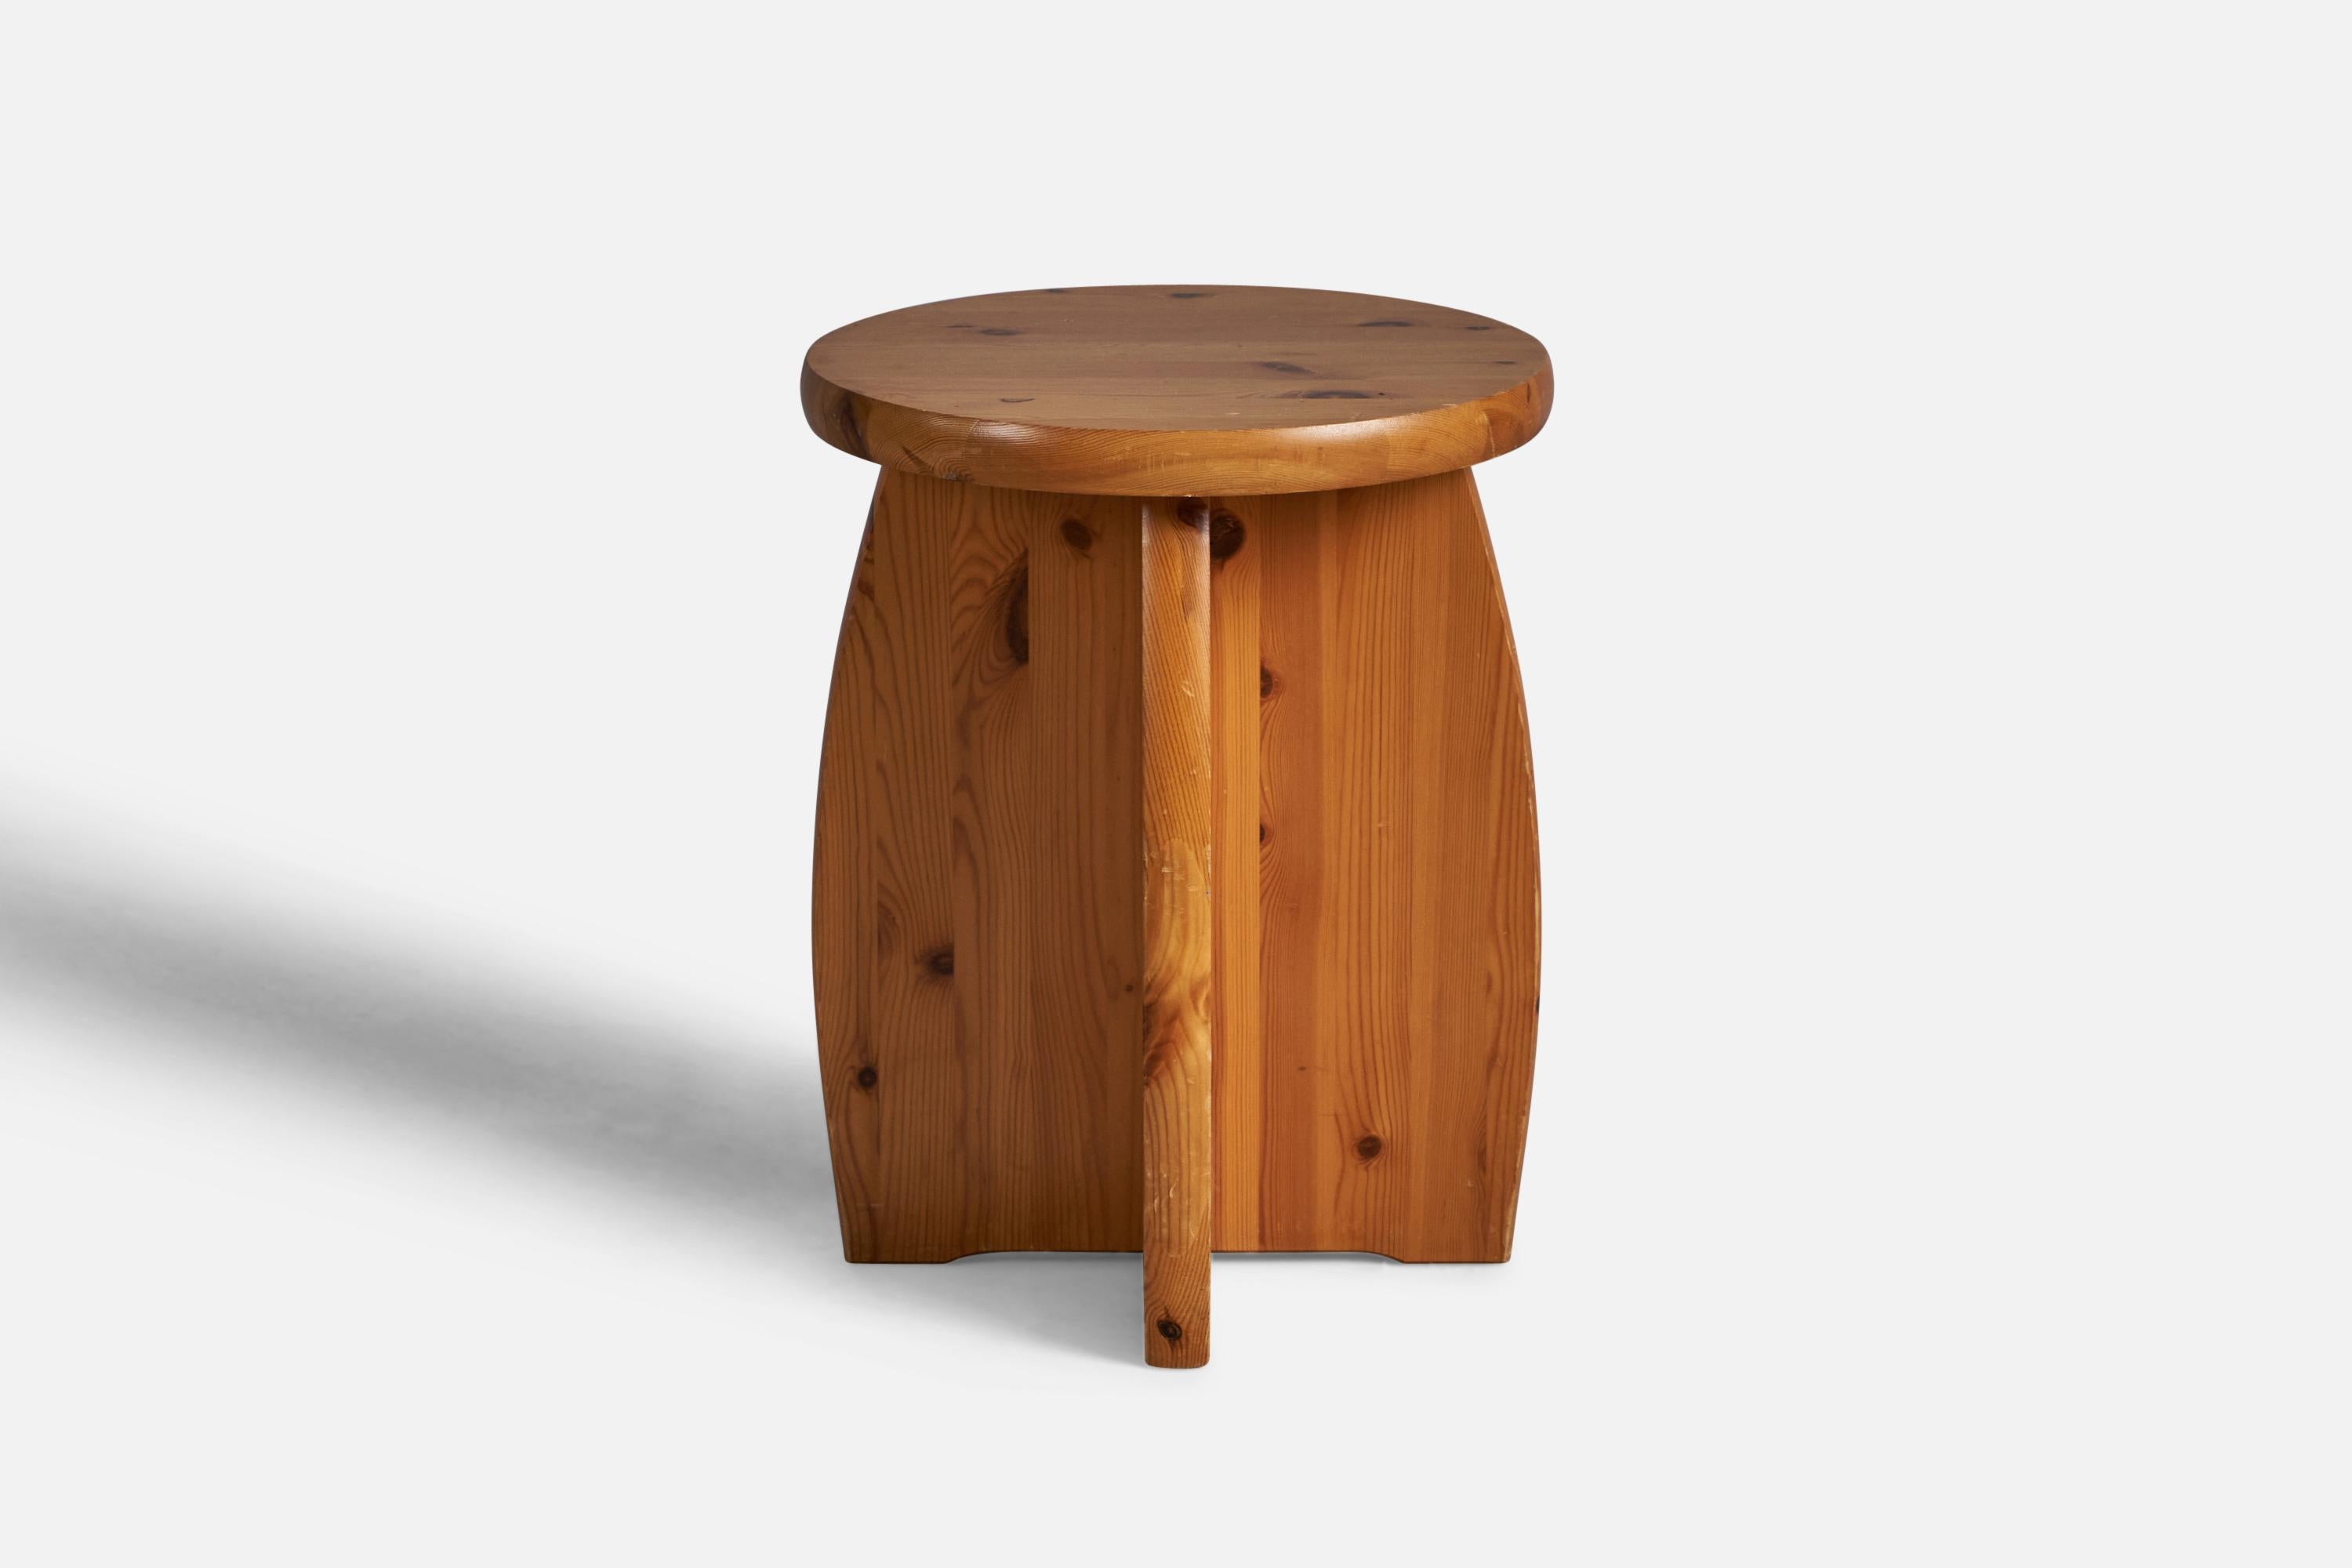 A solid pine stool, designed and produced in Sweden, 1970s.